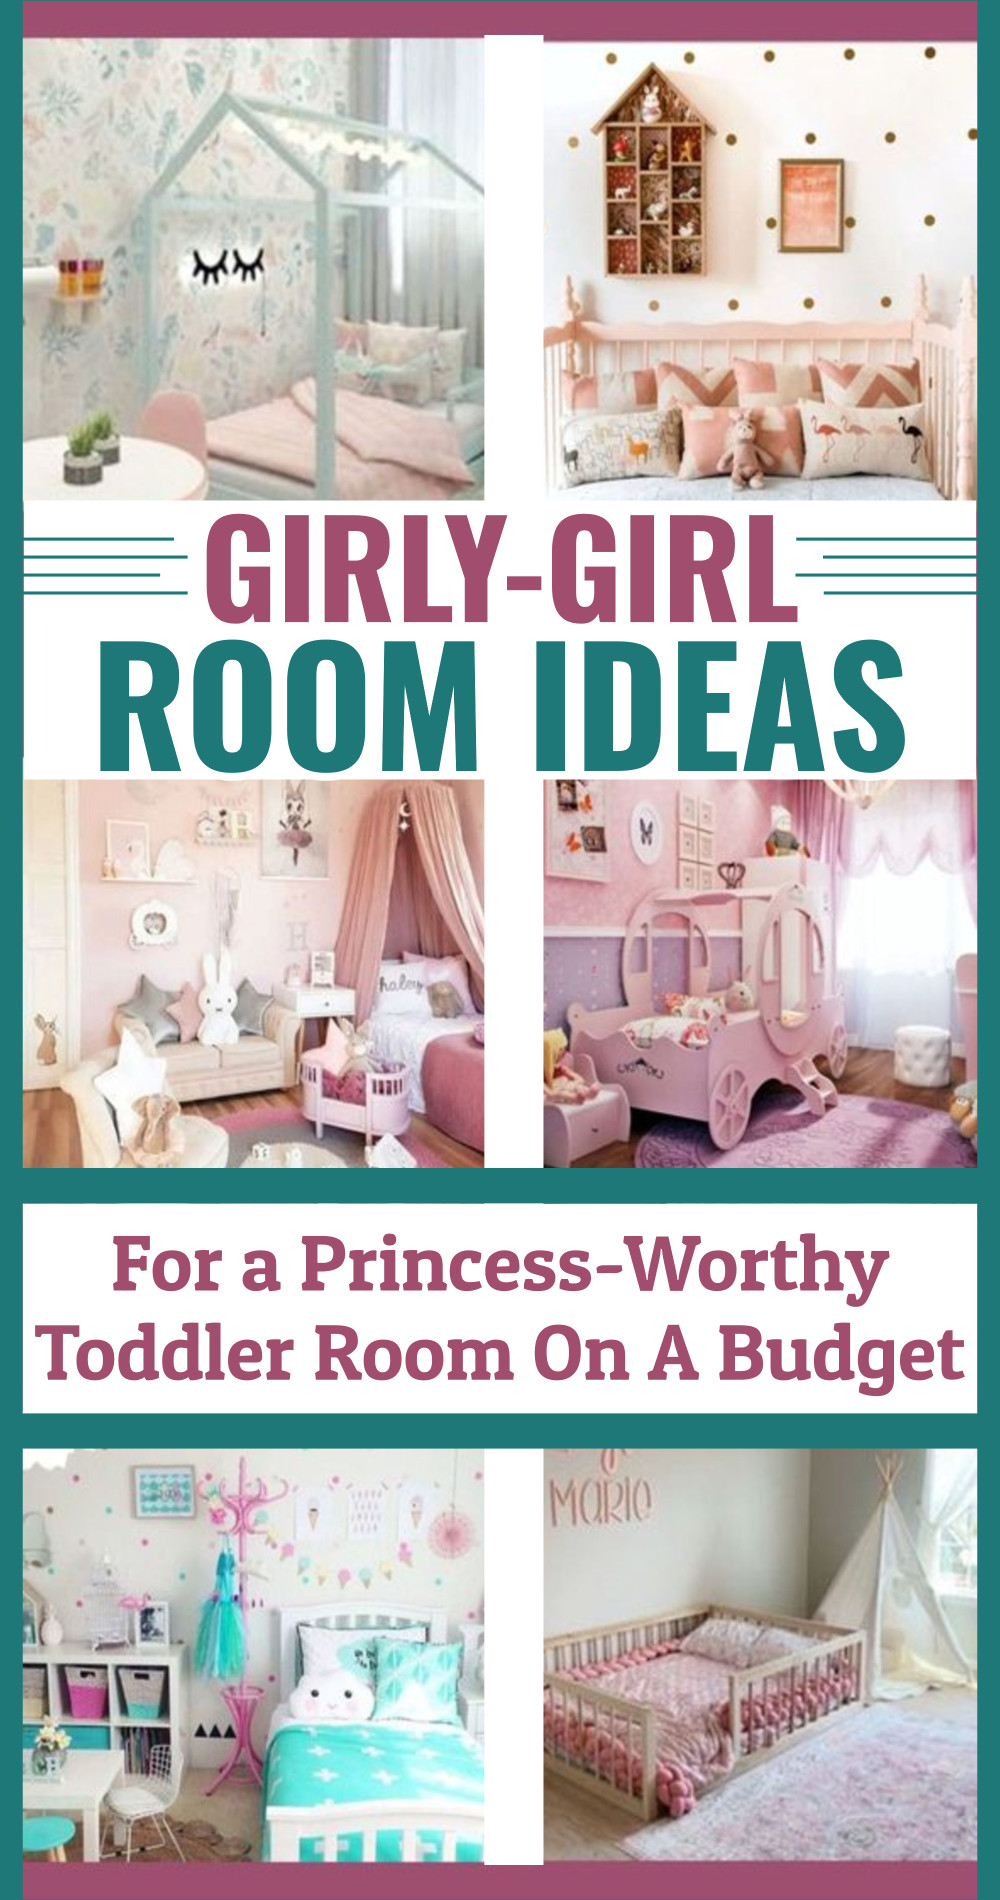 girly-girl room ideas for a princess-worthy toddler room on a budget